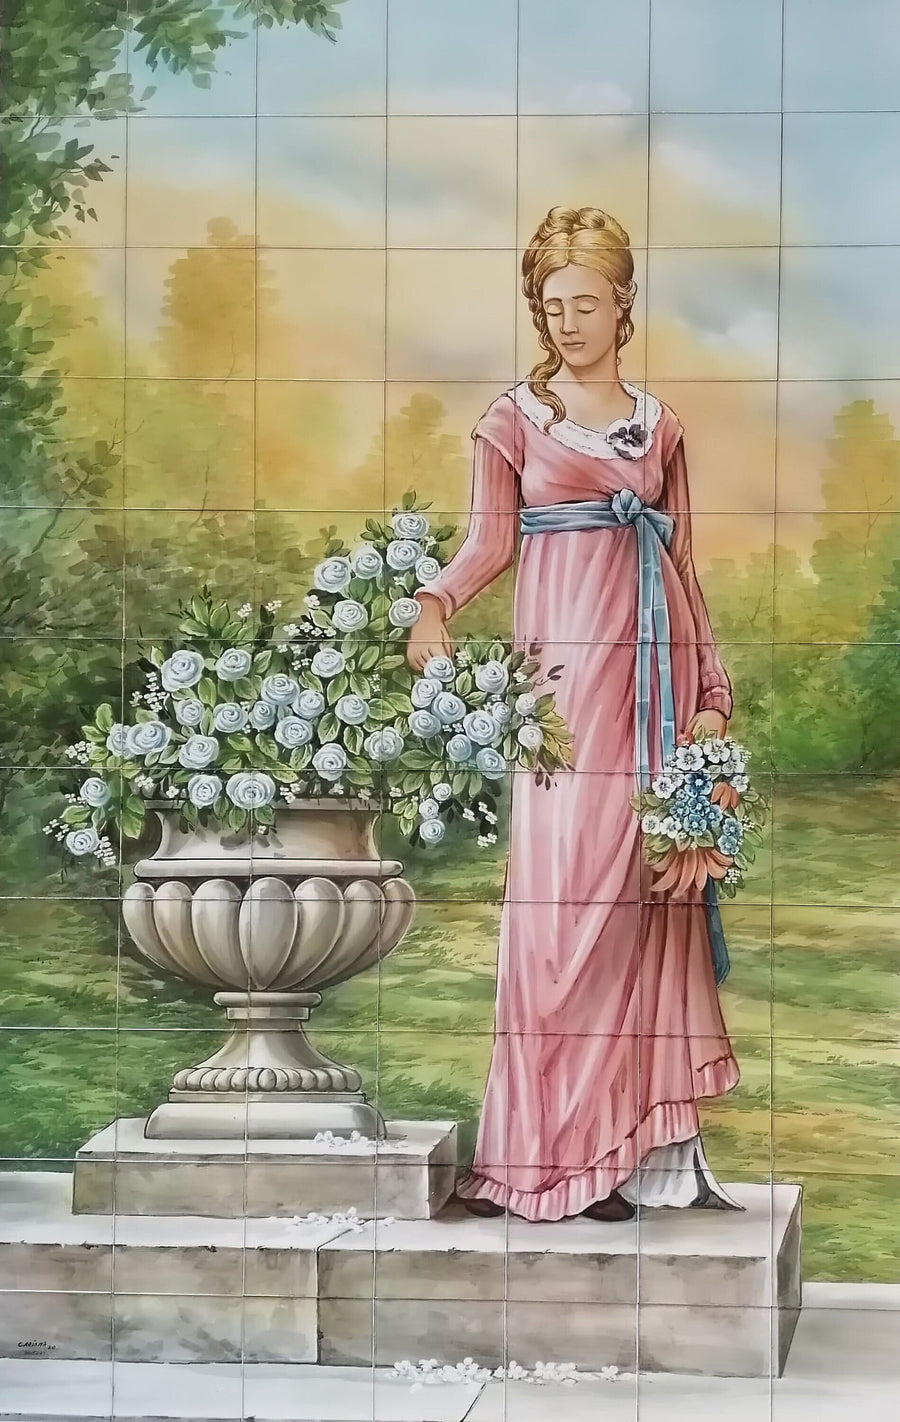 Lady in the Garden Tile Mural - Hand Painted Portuguese Tiles | Ref. PT329